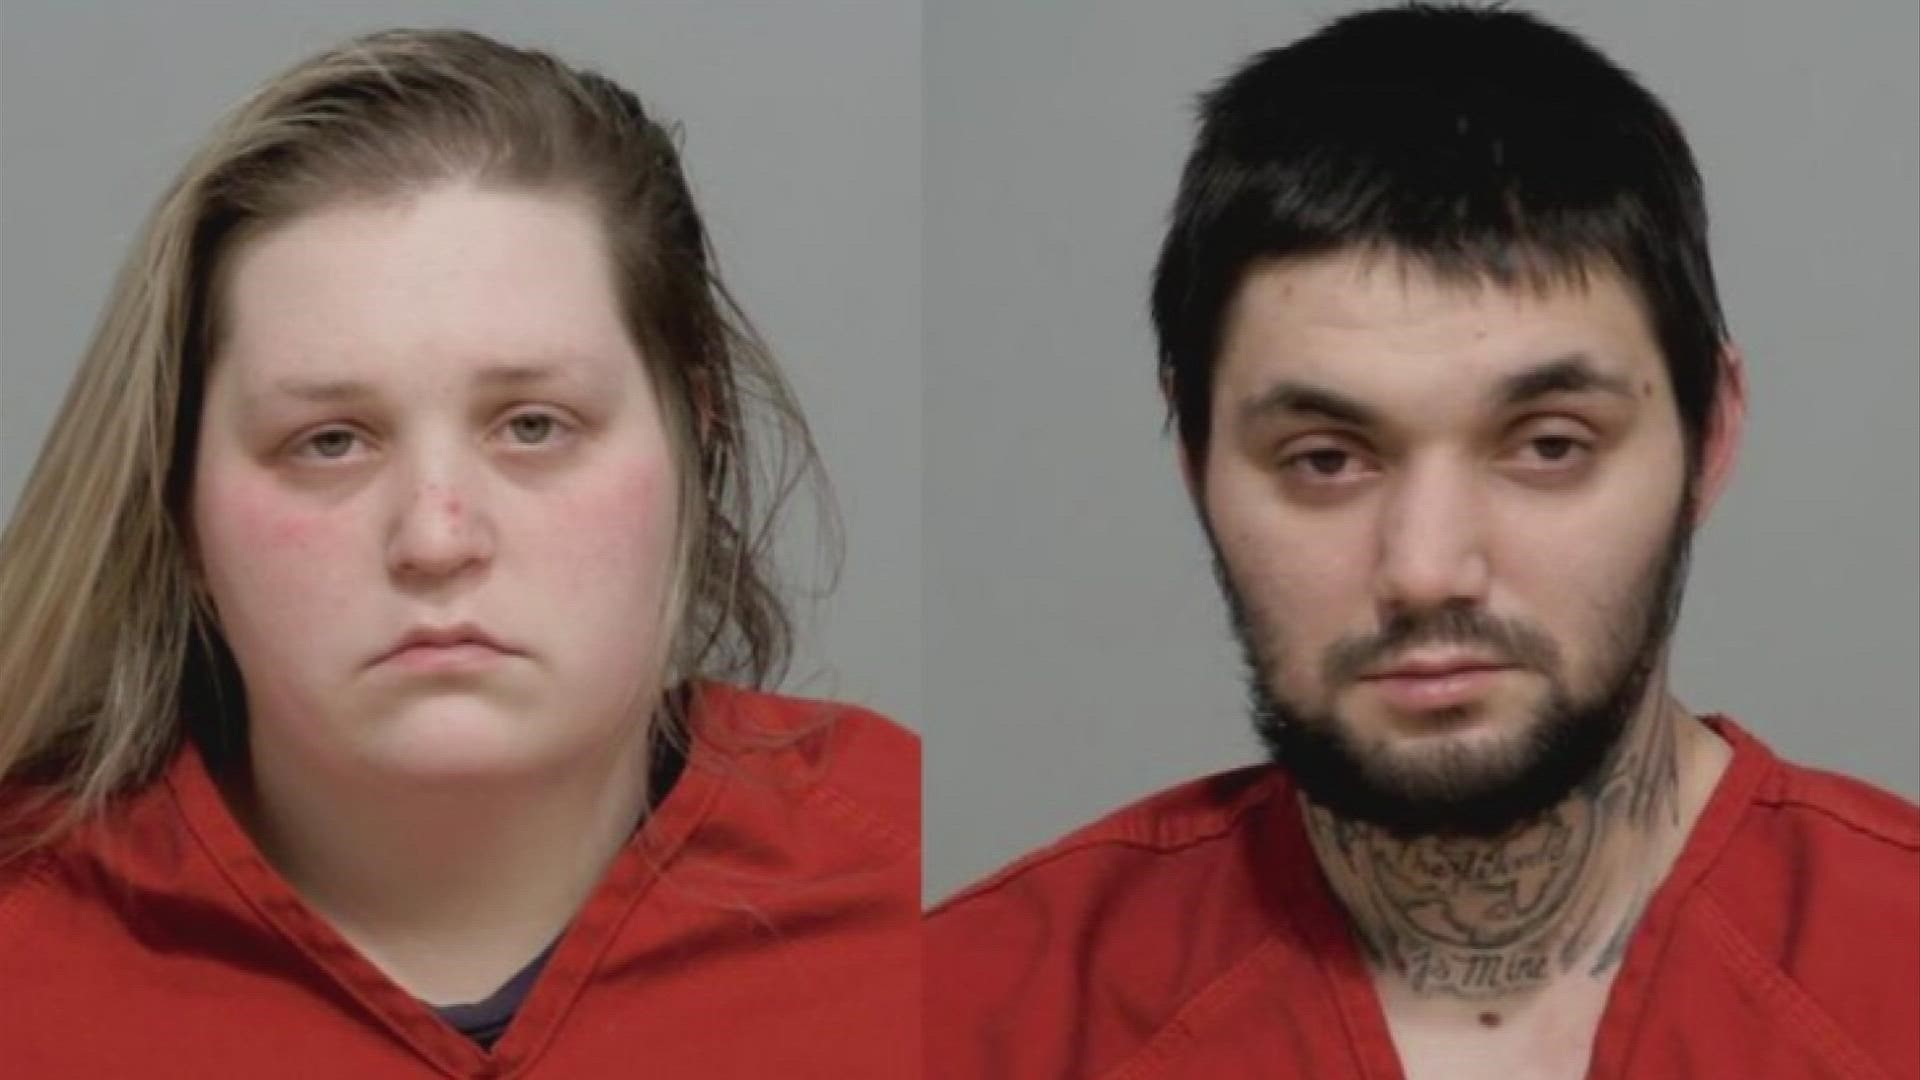 Police said Nicholas Lee and Brianna Roush have been arrested and charged after their 1-year-old child died after ingesting fentanyl.